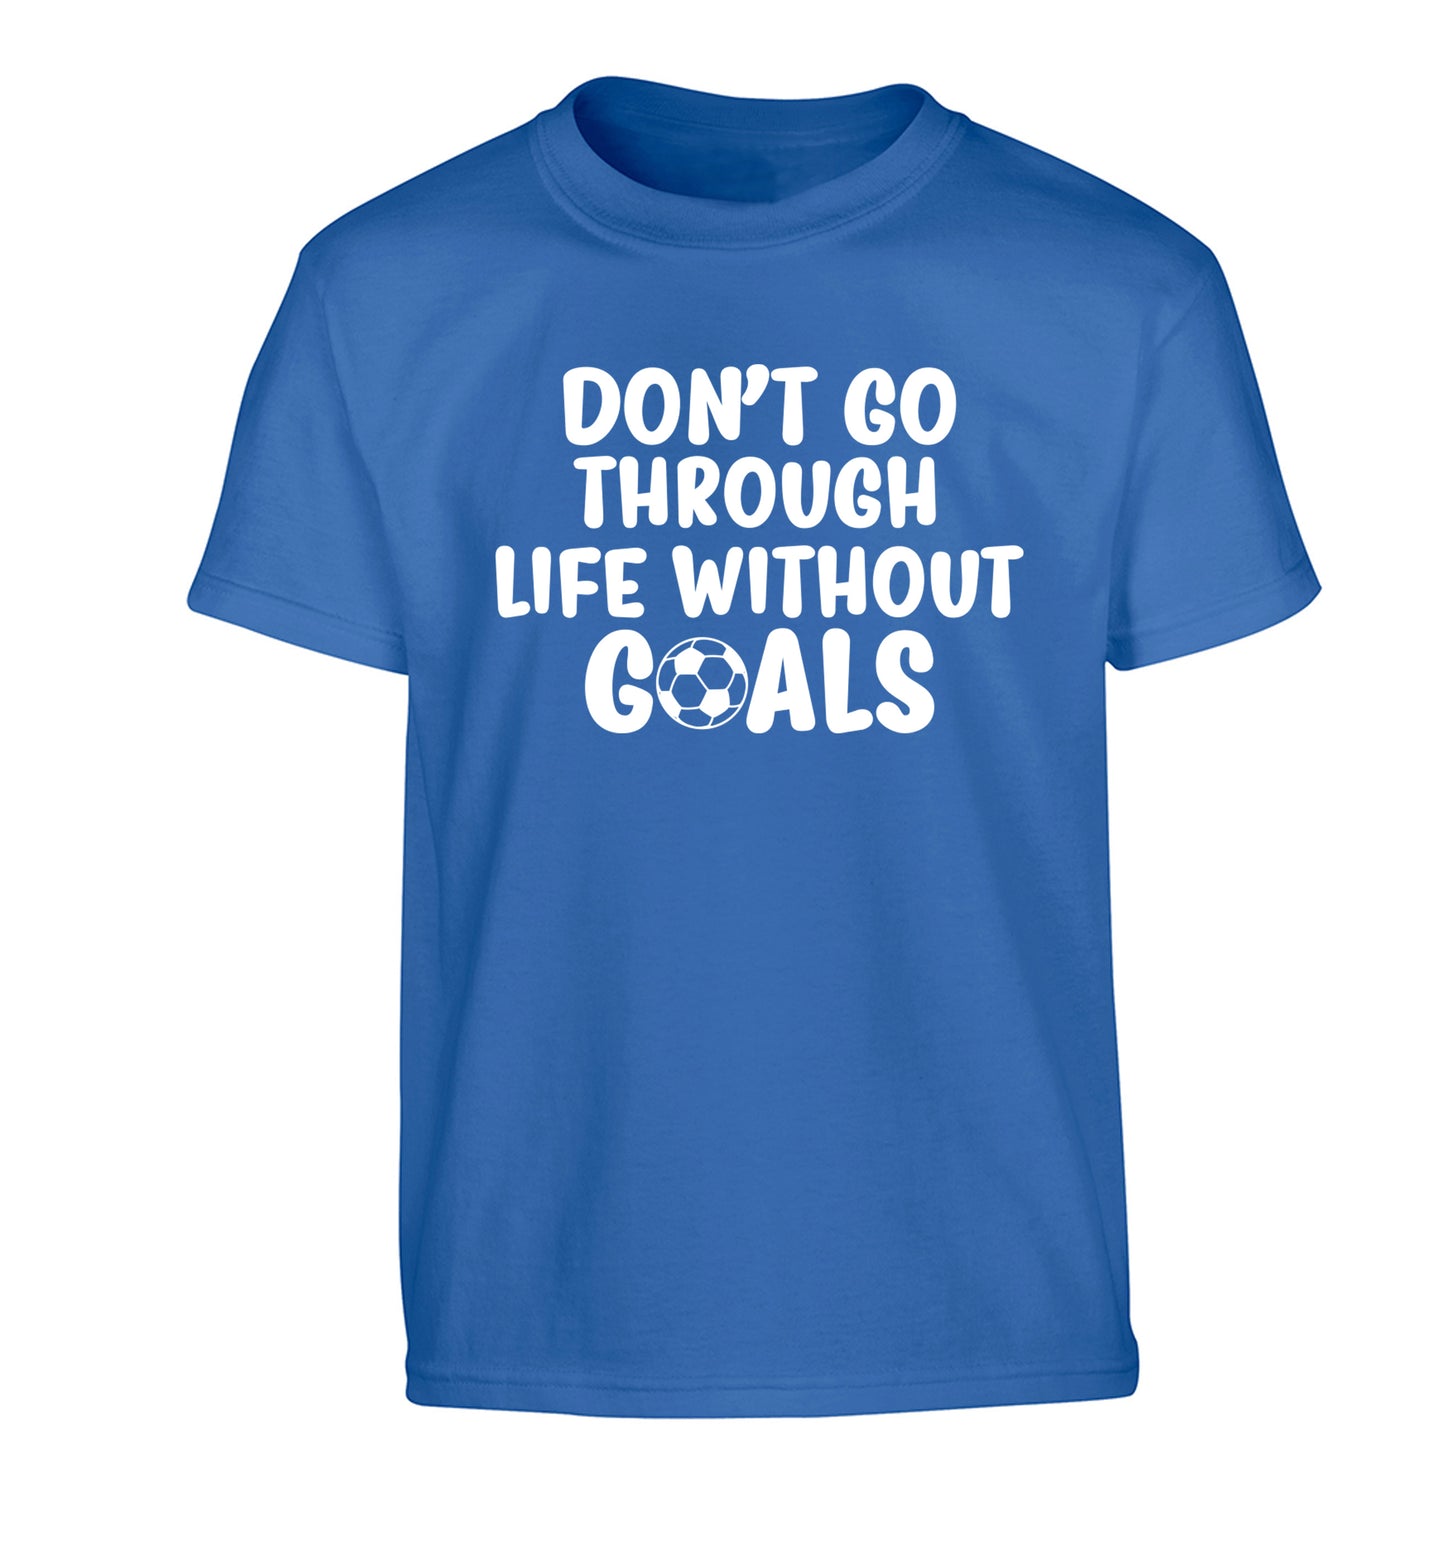 Don't go through life without goals Children's blue Tshirt 12-14 Years